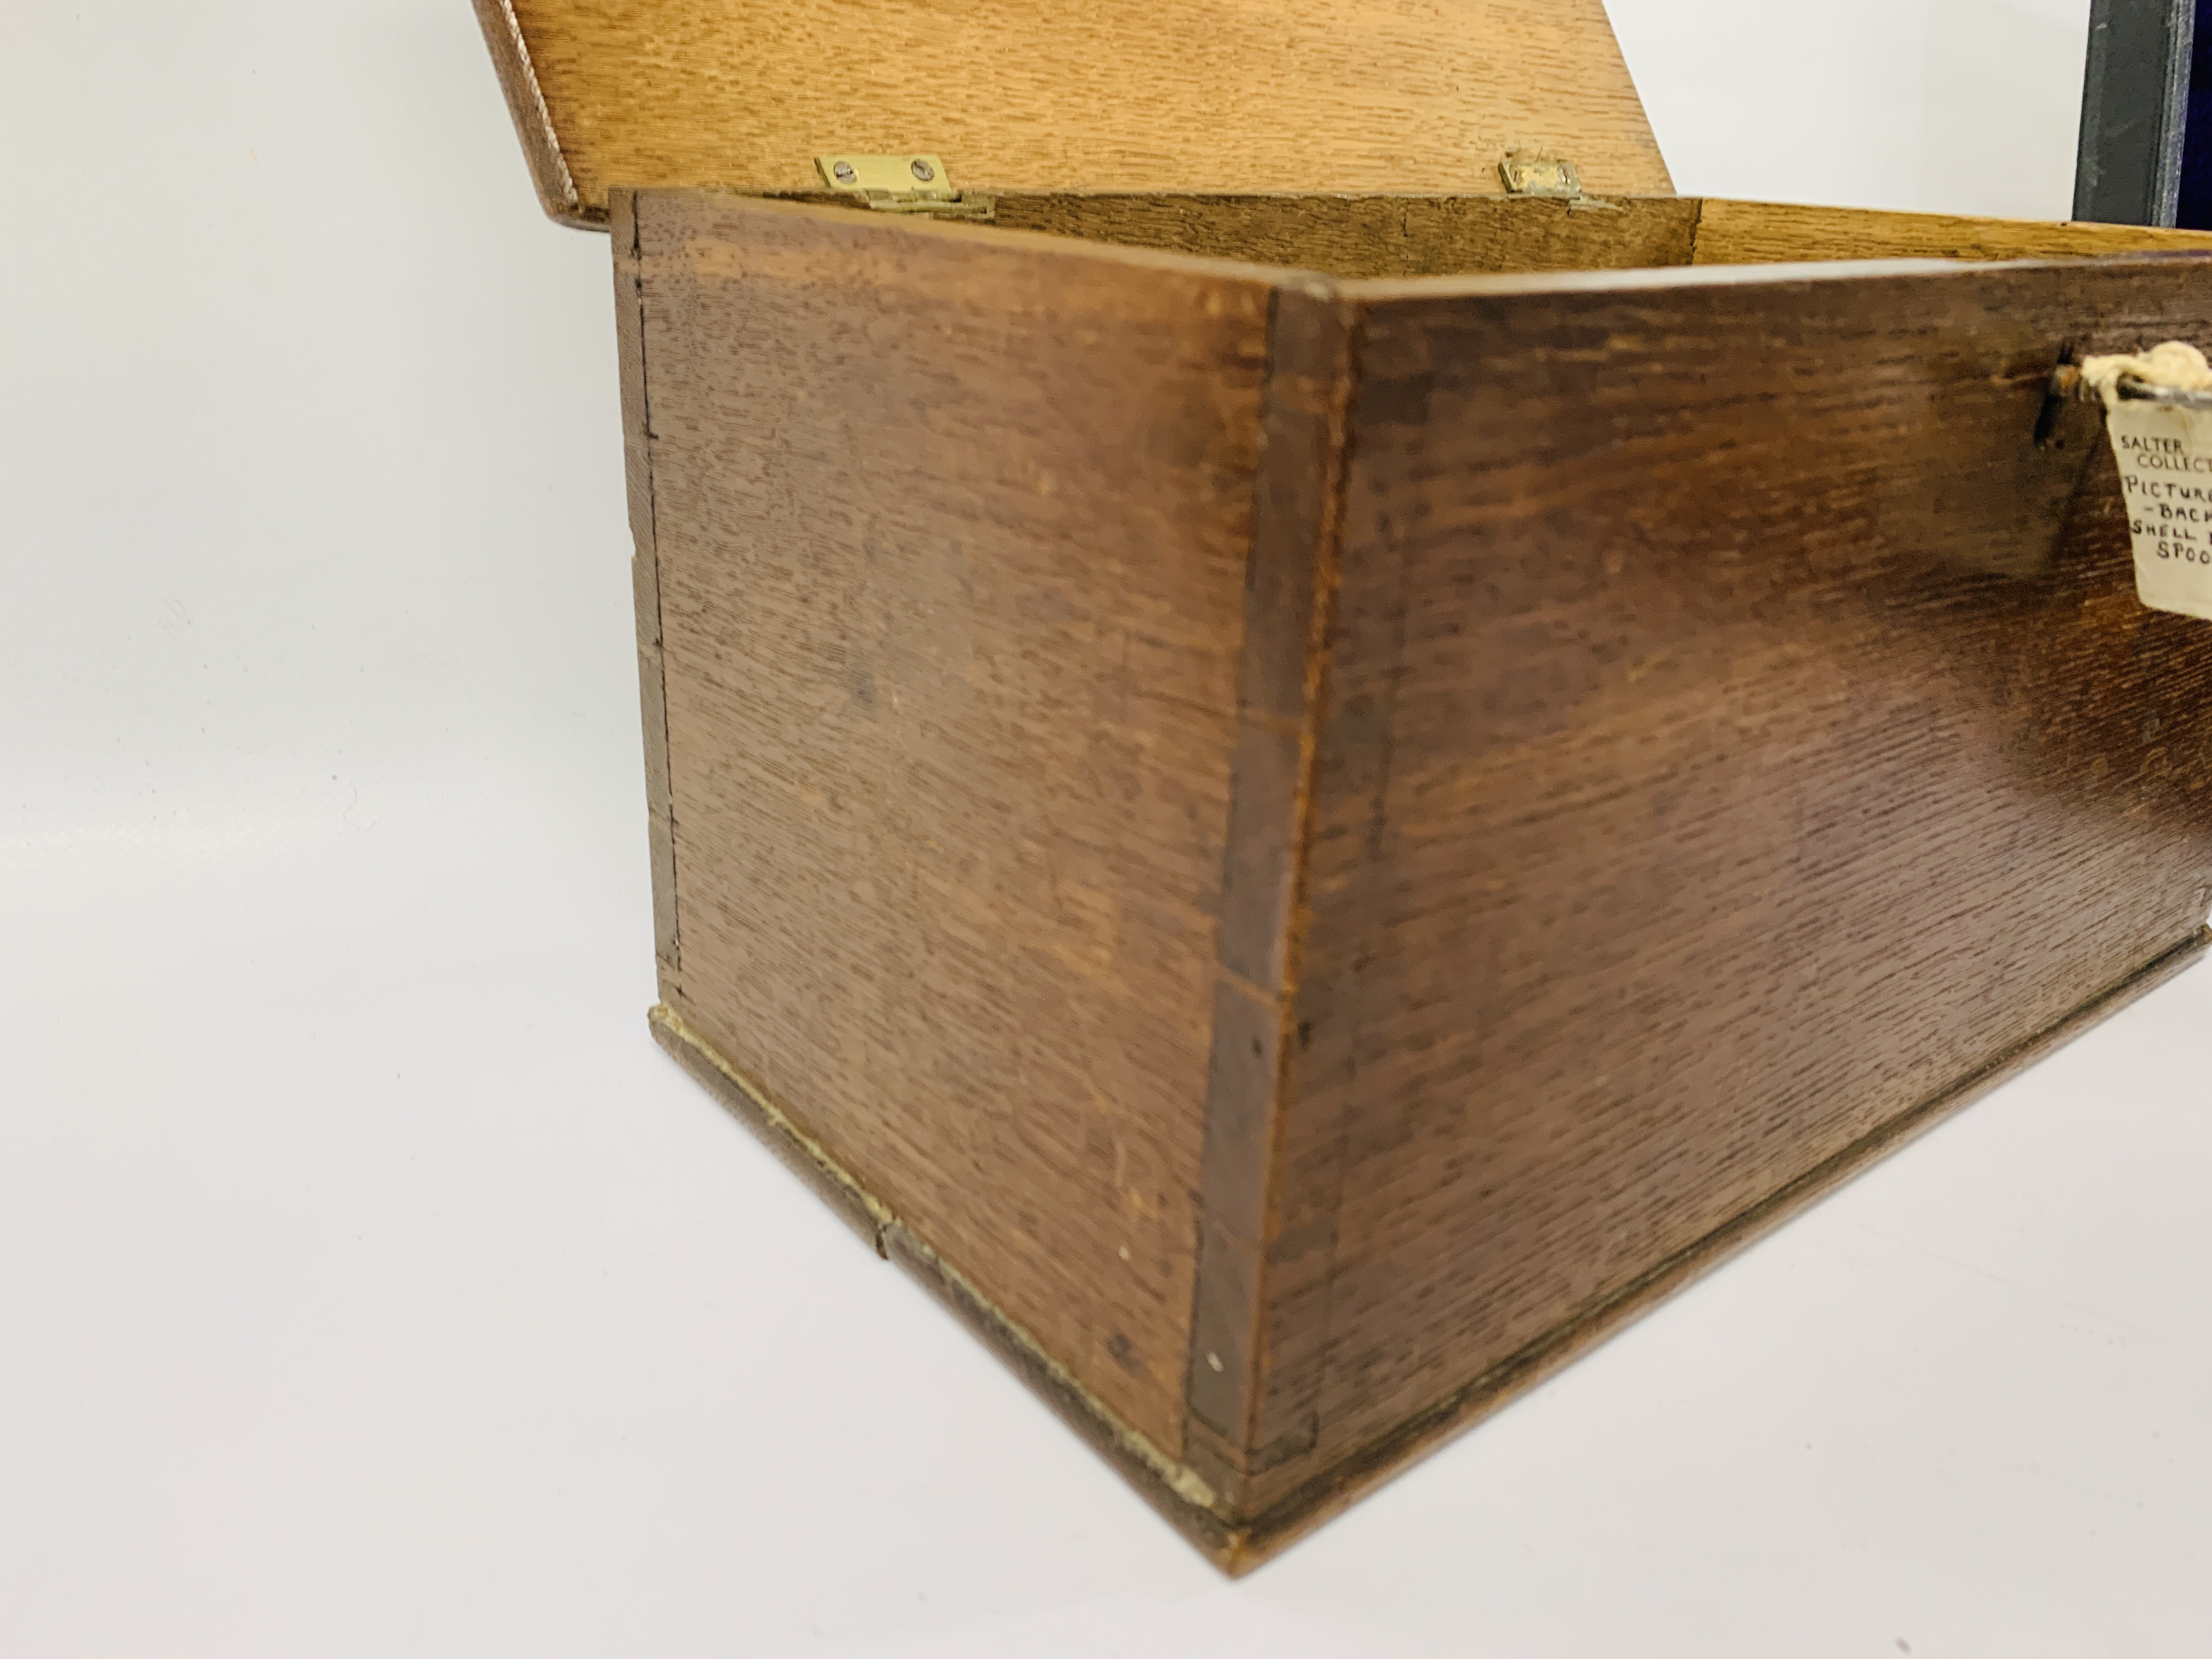 AN ANTIQUE LEATHERED JEWELLERY CASKET, - Image 17 of 27